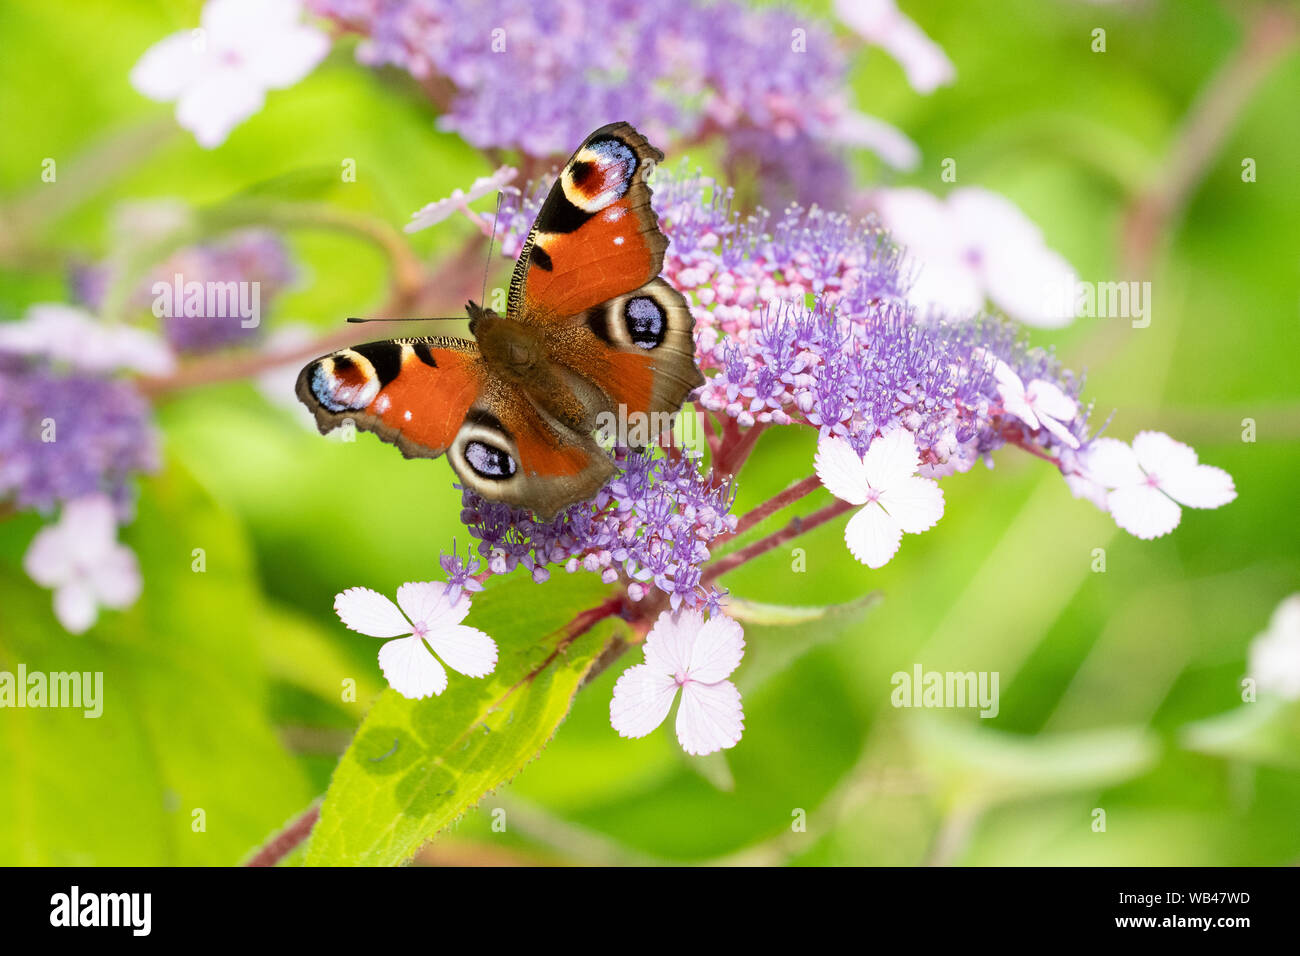 Killearn, Stirlingshire, Scotland, UK. 24th Aug, 2019. UK weather - a peacock butterfly shimmers in warm, hazy sunshine in a Stirlingshire garden. Credit: Kay Roxby/Alamy Live News Stock Photo